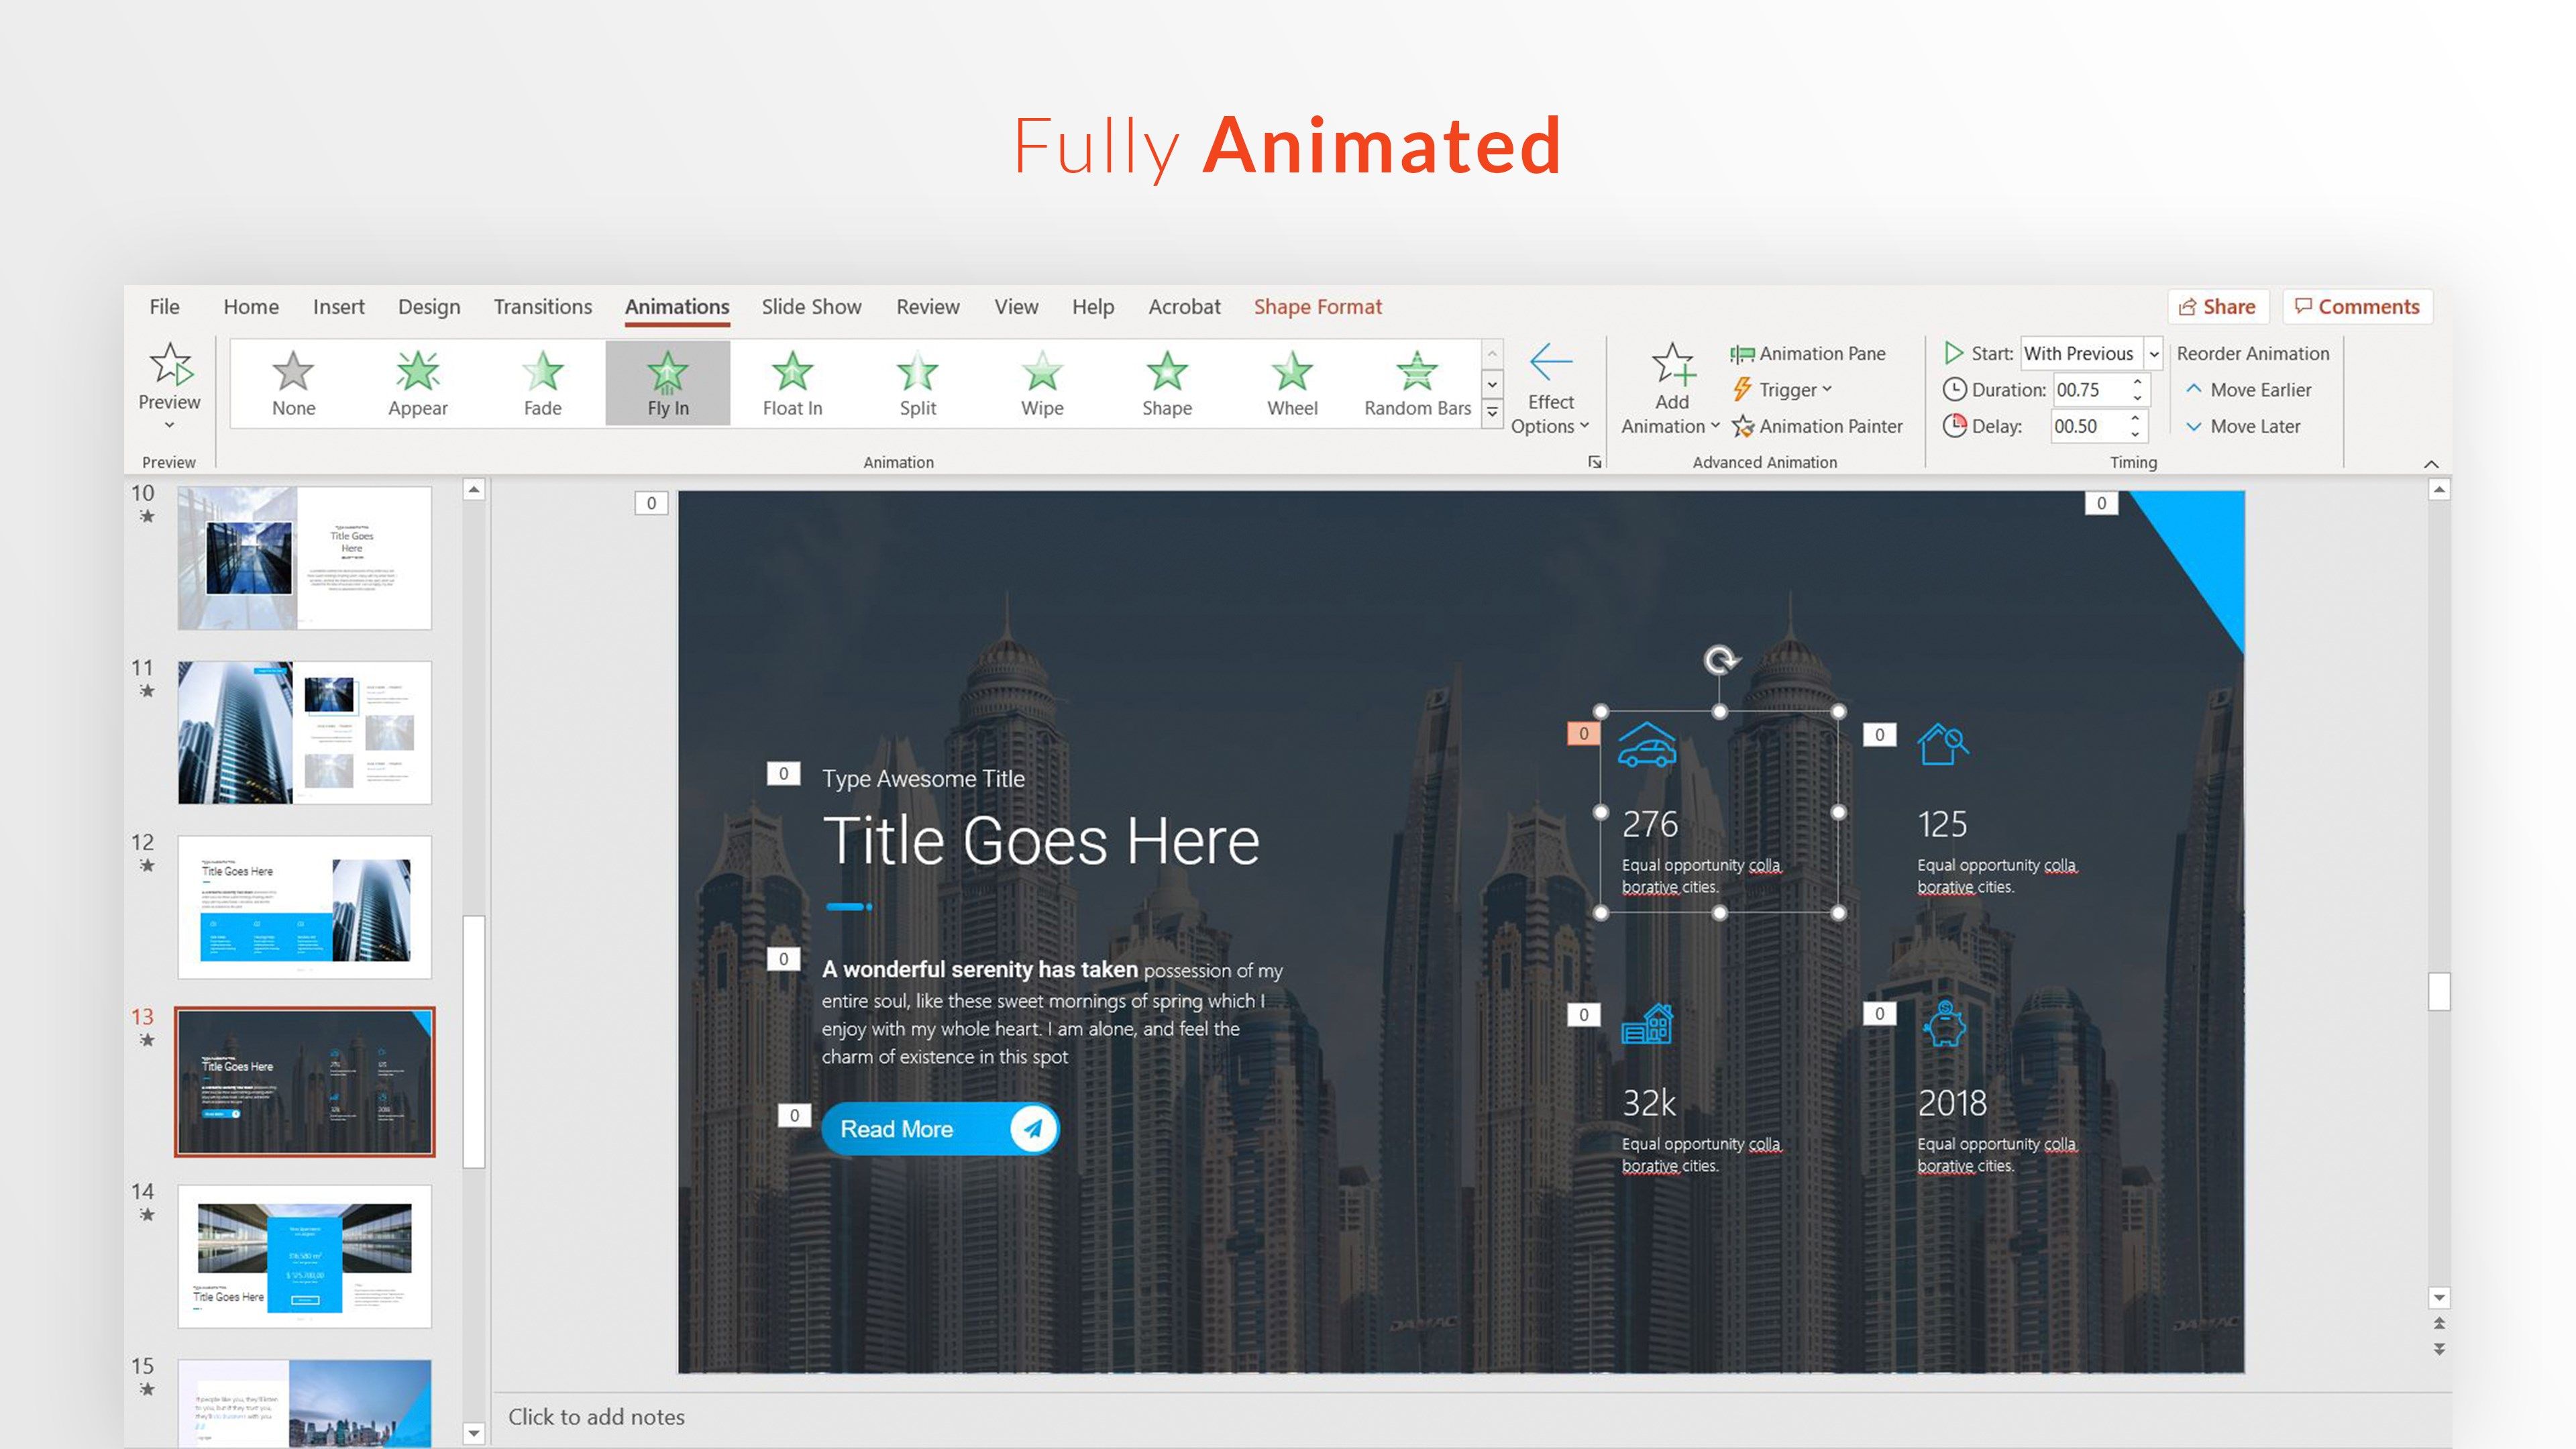 Fully animated slides and fully customizable.